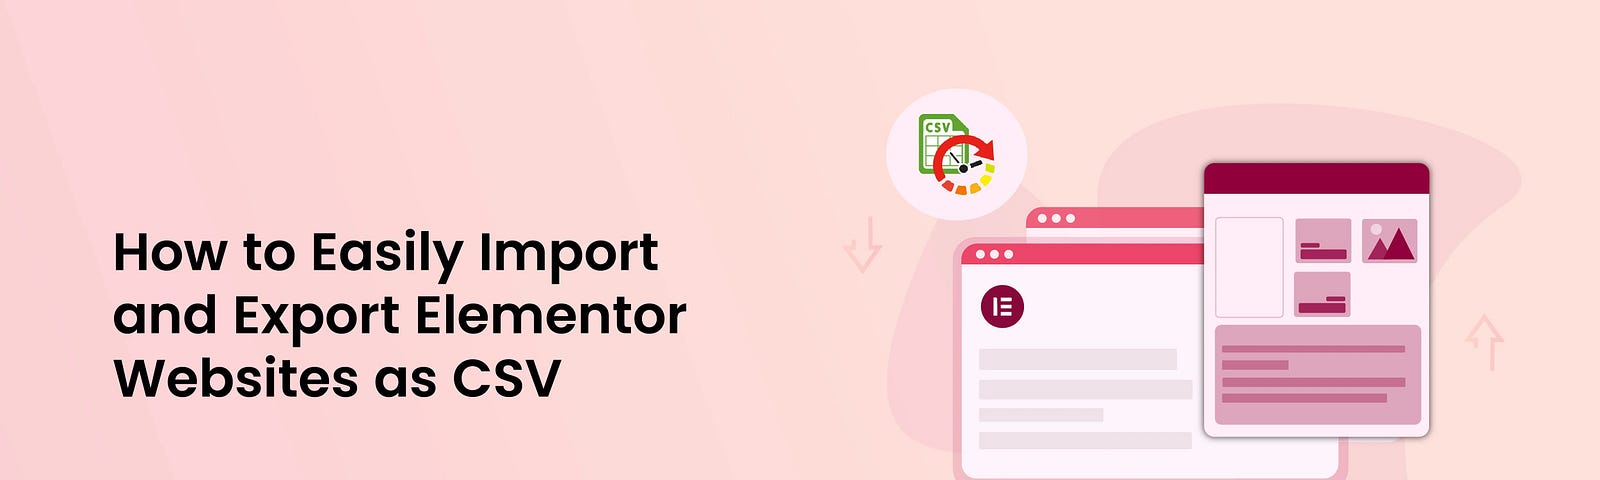 How-to-Import-Export-Elementor-Websites-as-CSV